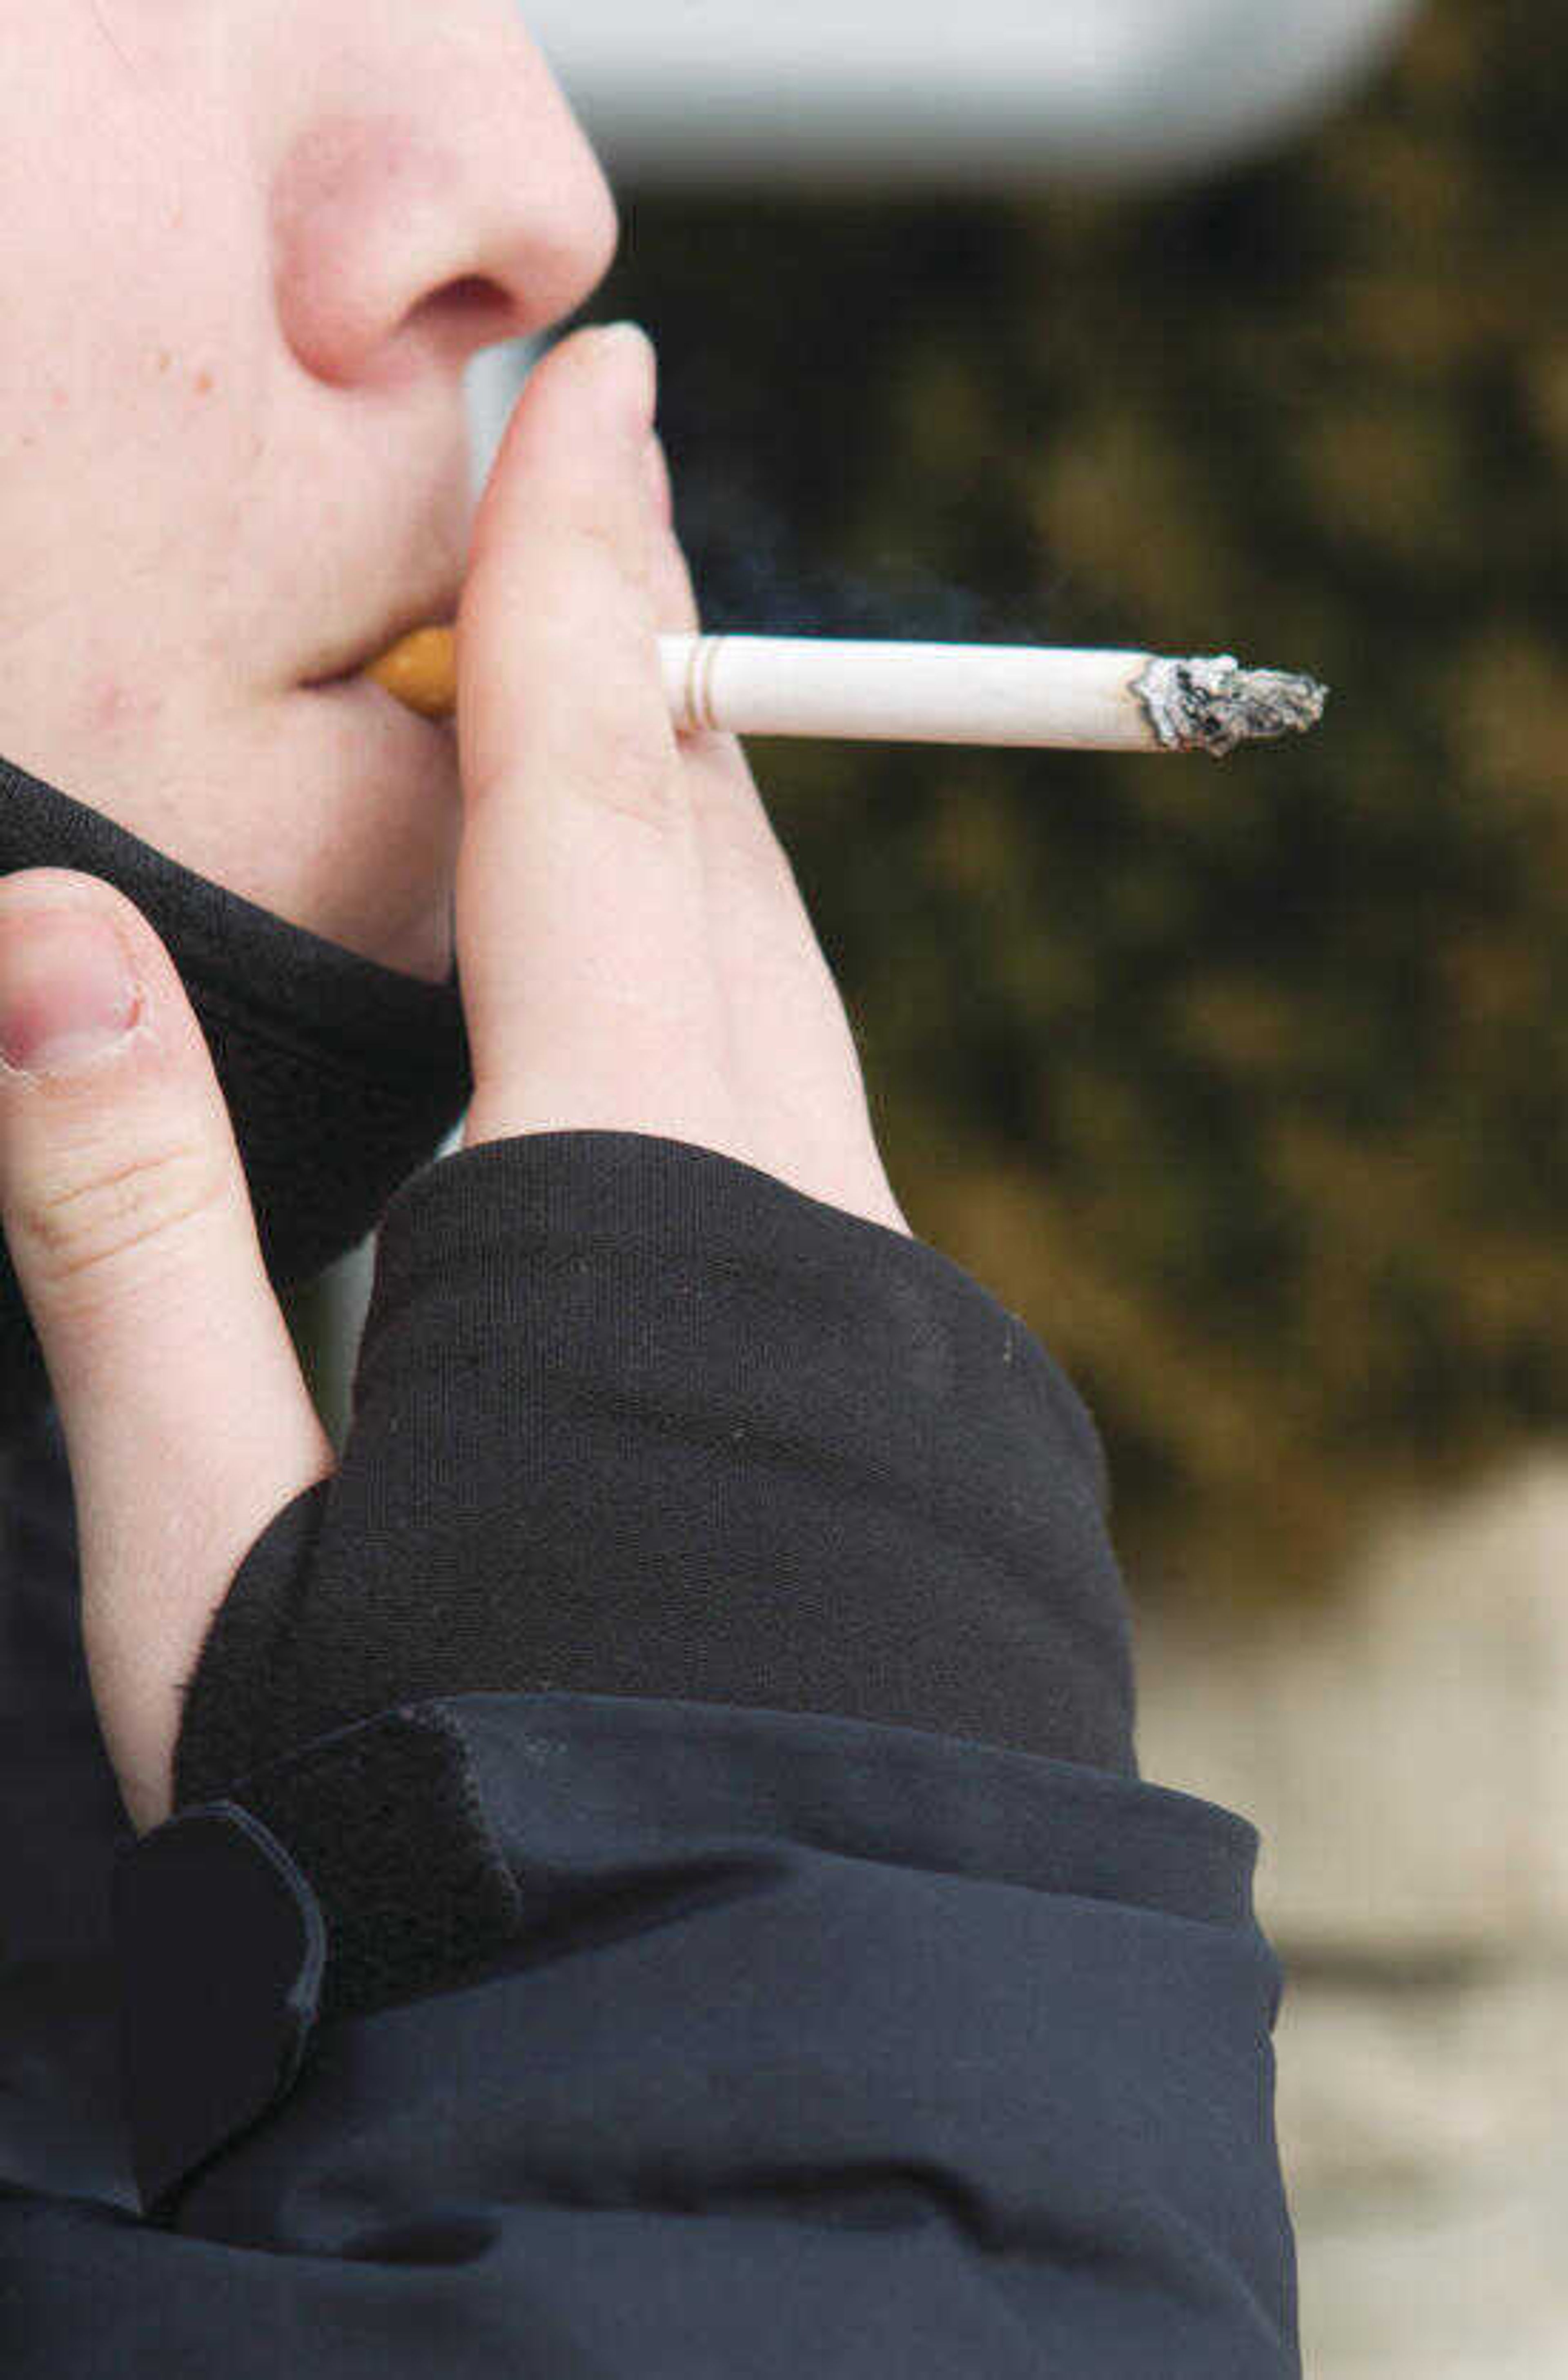 Students have voice in campus tobacco policy conversation